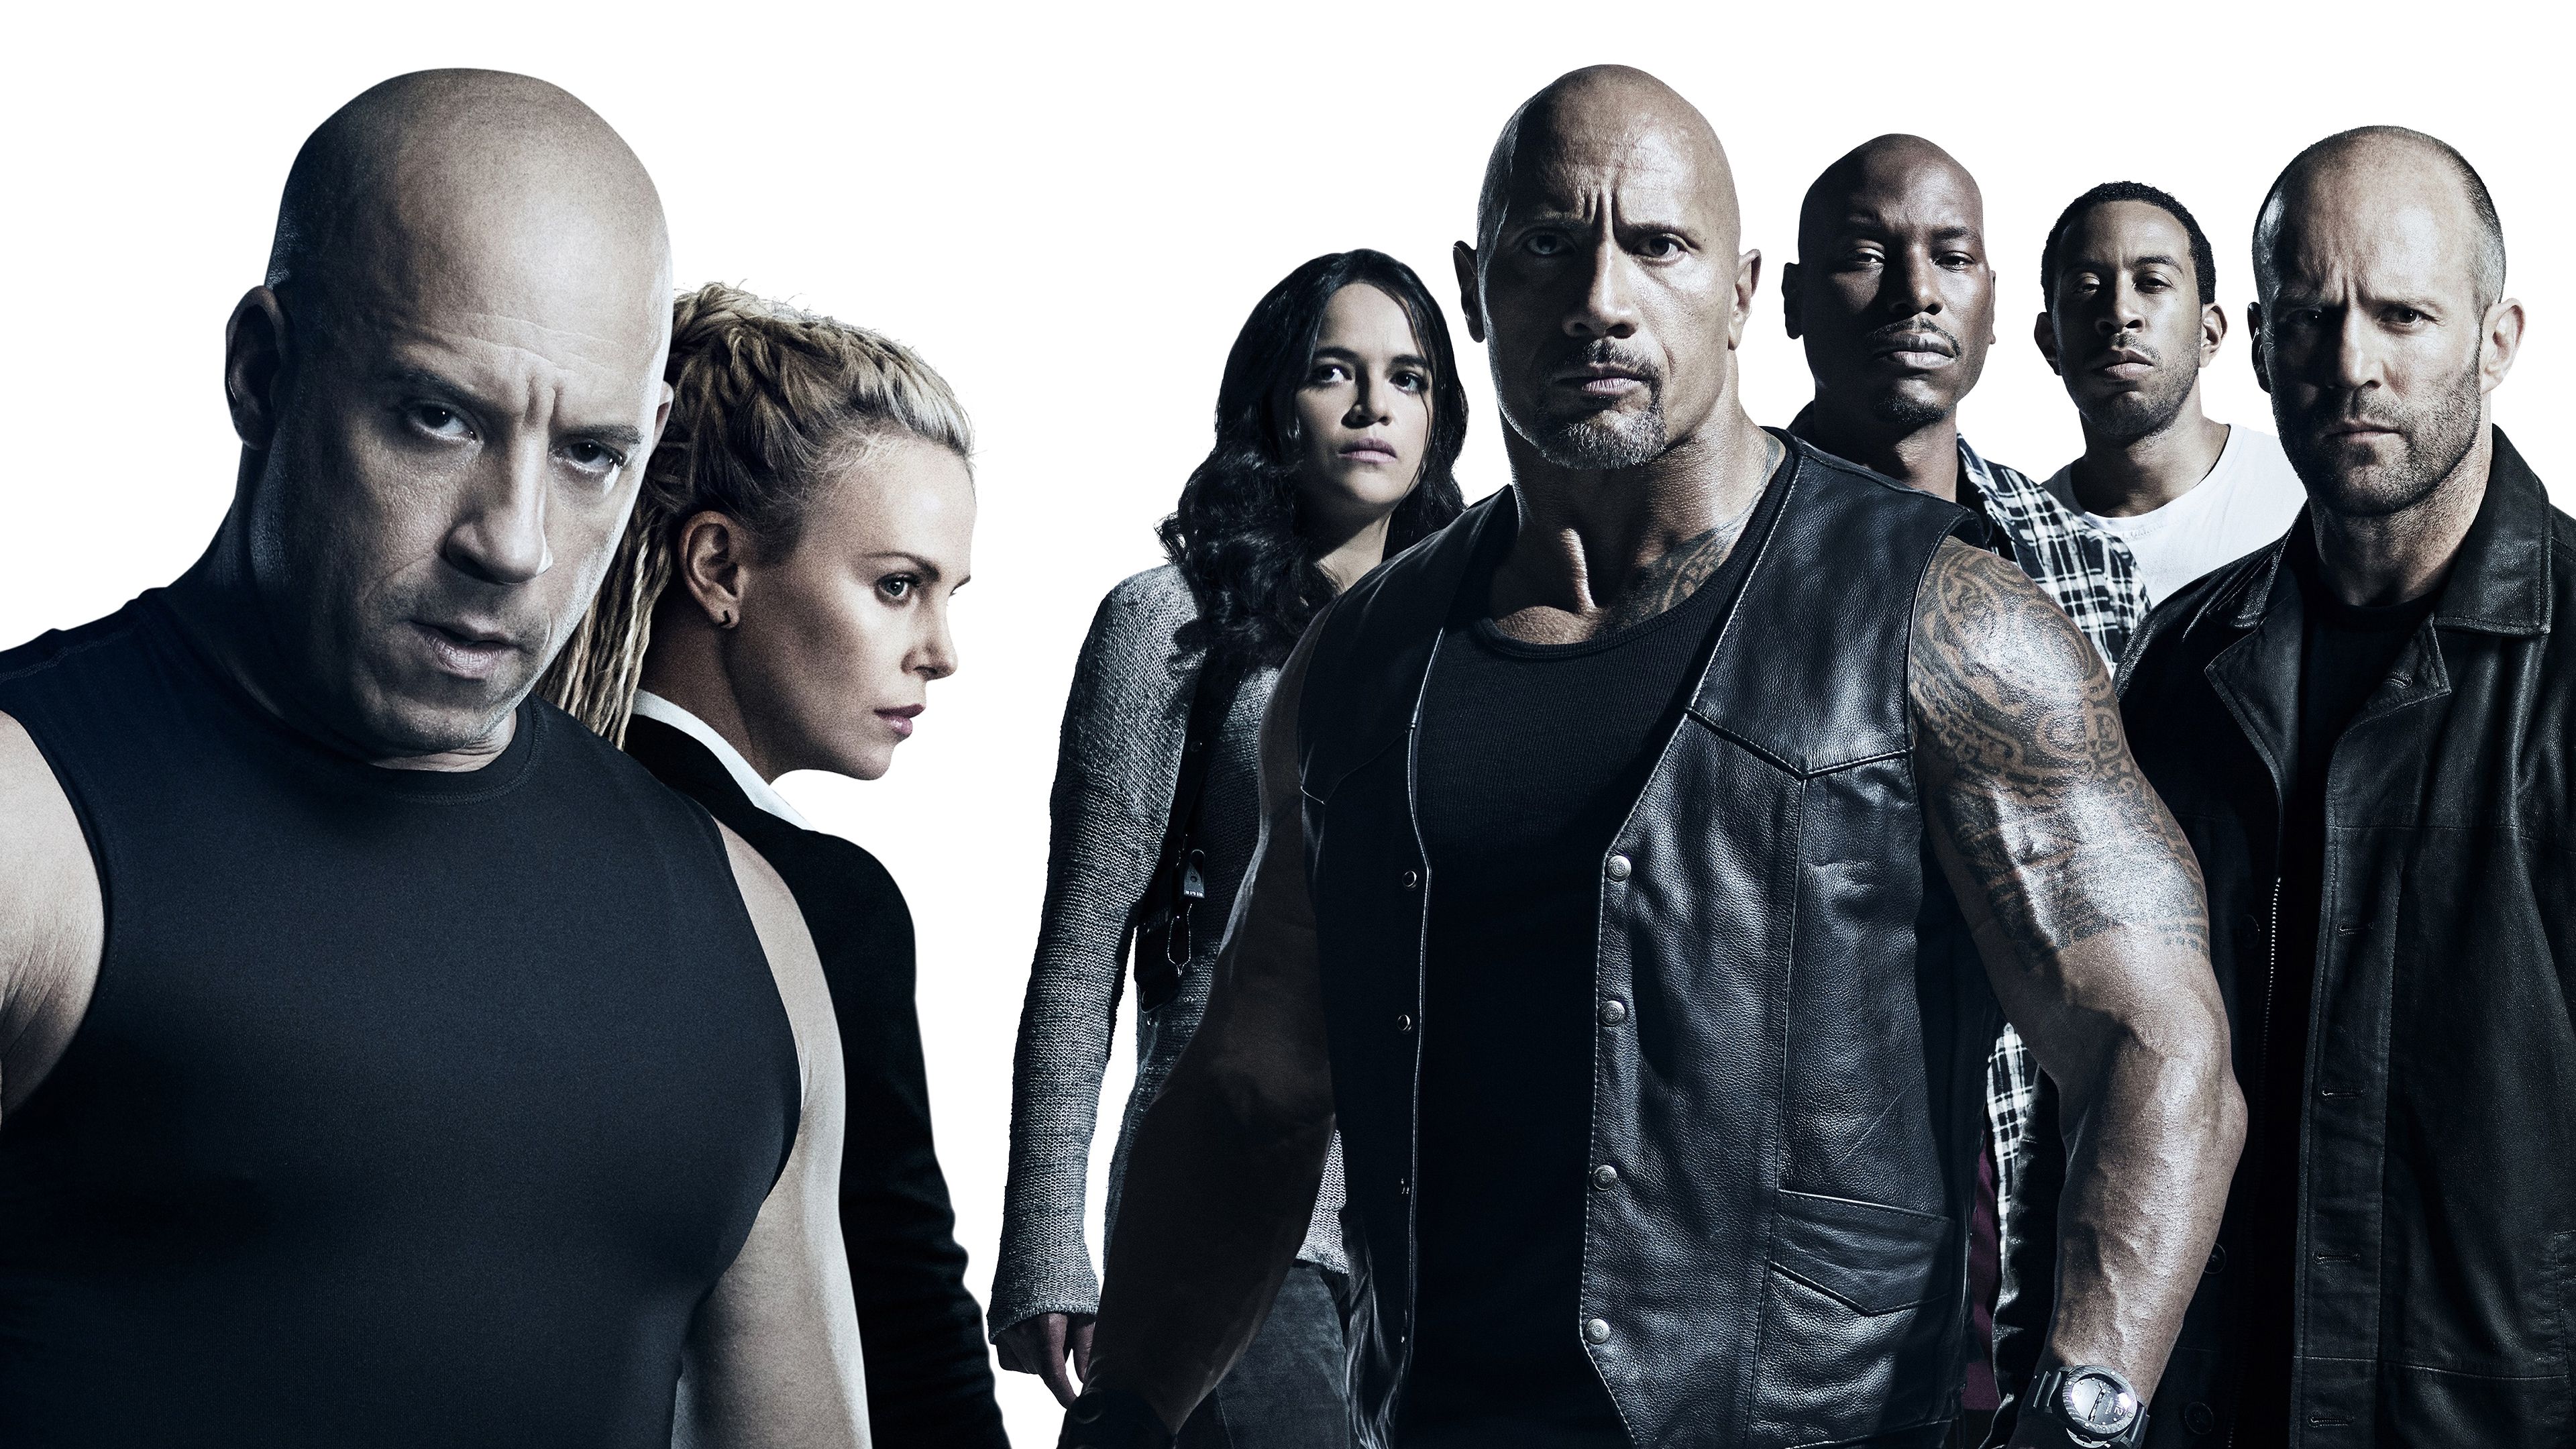 The Fate of The Furious HD Wallpaper. Background